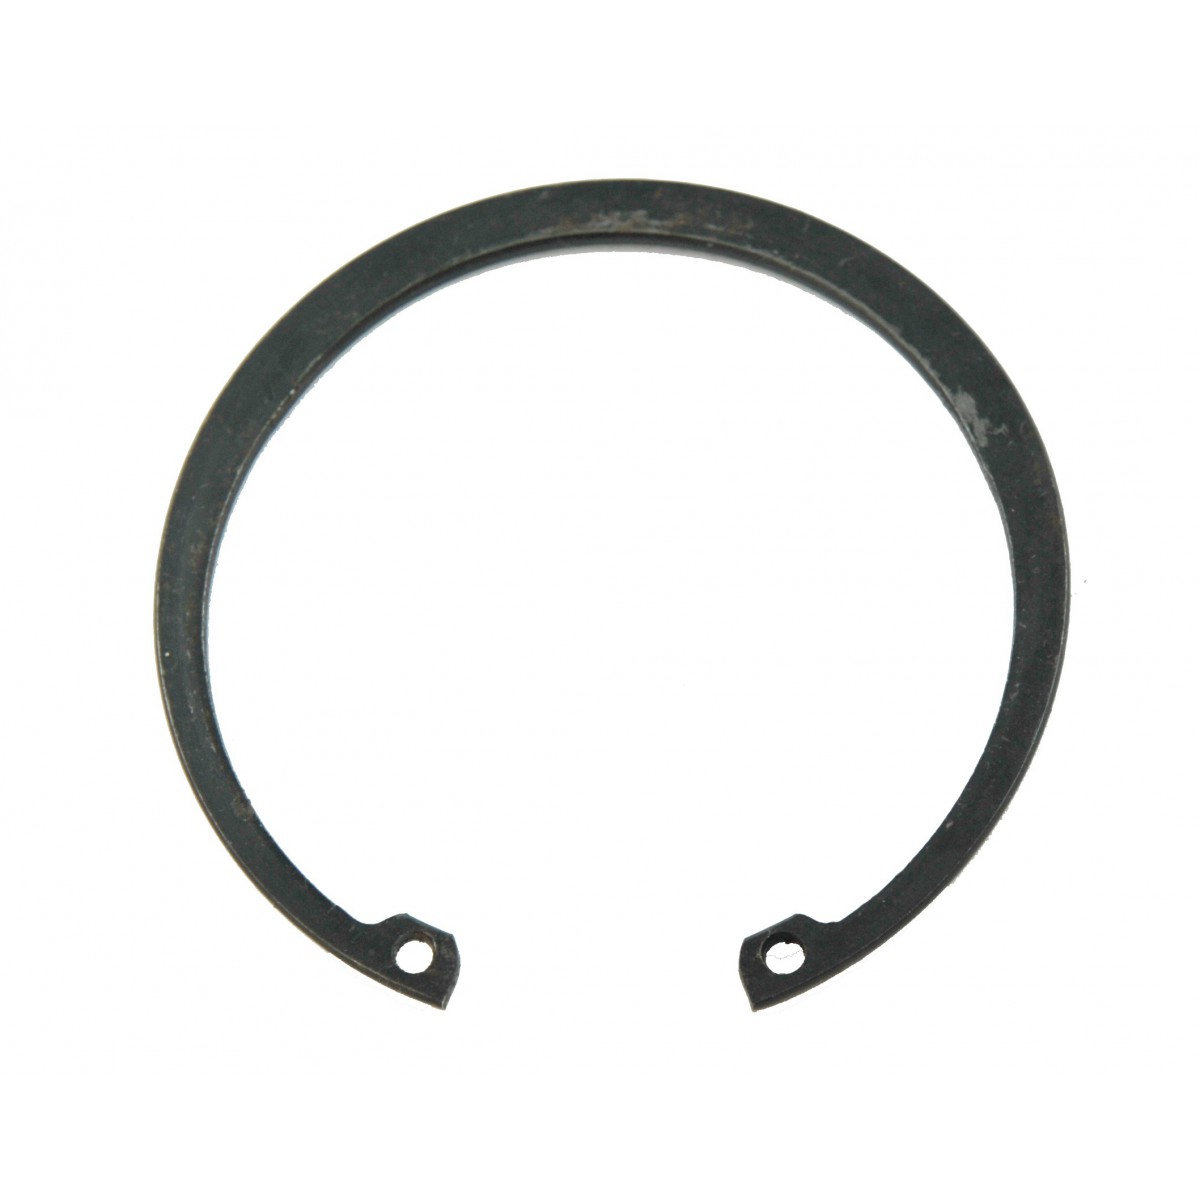 A 67x77 mm securing ring for the SB separating rotor